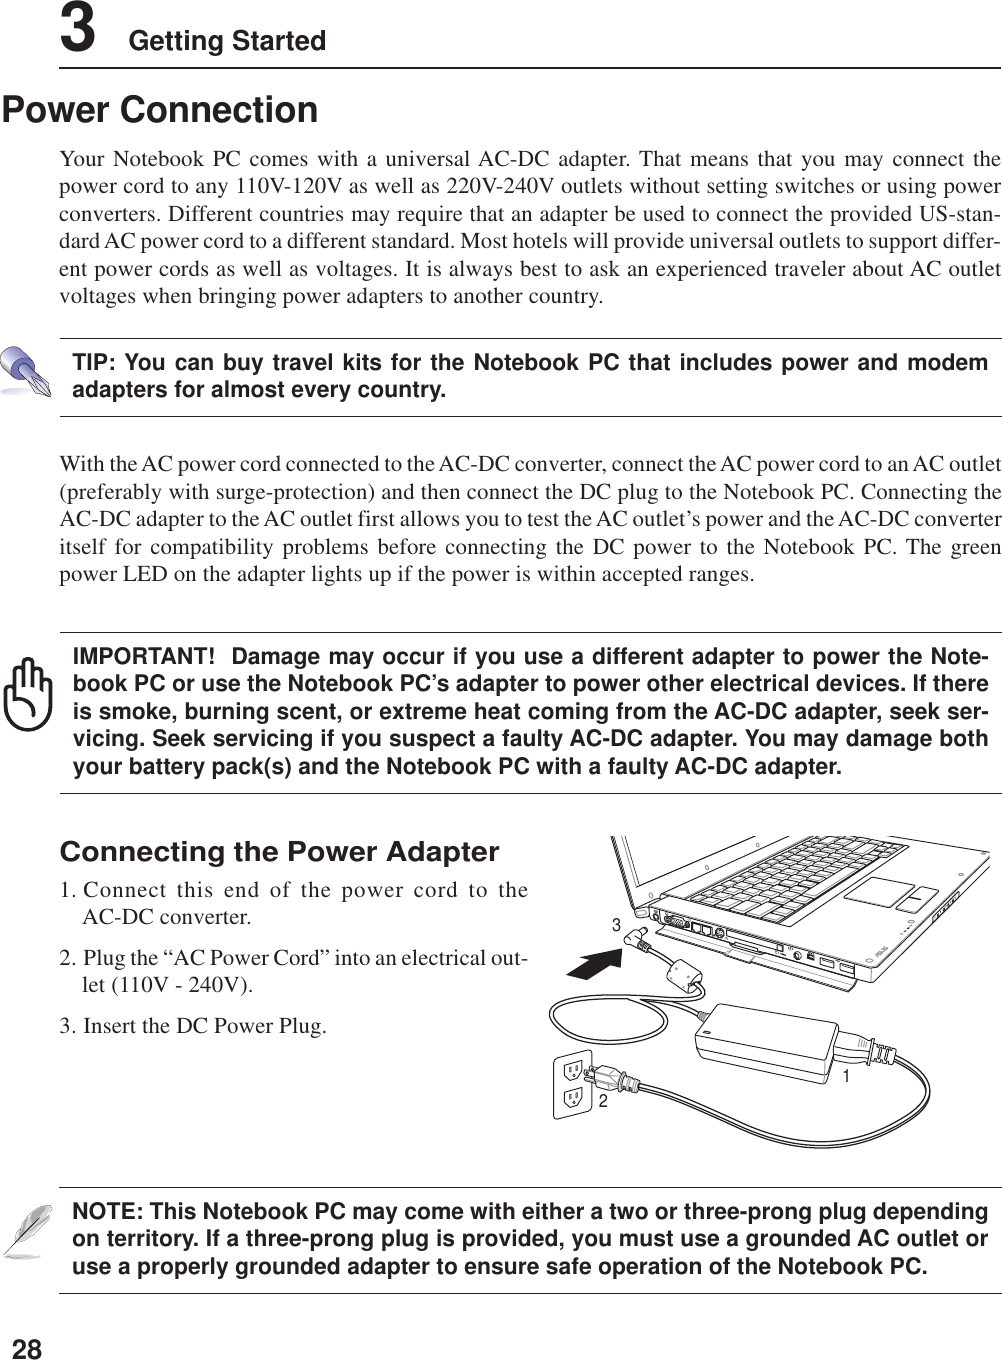 283    Getting StartedNOTE: This Notebook PC may come with either a two or three-prong plug dependingon territory. If a three-prong plug is provided, you must use a grounded AC outlet oruse a properly grounded adapter to ensure safe operation of the Notebook PC.Power ConnectionYour Notebook PC comes with a universal AC-DC adapter. That means that you may connect thepower cord to any 110V-120V as well as 220V-240V outlets without setting switches or using powerconverters. Different countries may require that an adapter be used to connect the provided US-stan-dard AC power cord to a different standard. Most hotels will provide universal outlets to support differ-ent power cords as well as voltages. It is always best to ask an experienced traveler about AC outletvoltages when bringing power adapters to another country.With the AC power cord connected to the AC-DC converter, connect the AC power cord to an AC outlet(preferably with surge-protection) and then connect the DC plug to the Notebook PC. Connecting theAC-DC adapter to the AC outlet first allows you to test the AC outlet’s power and the AC-DC converteritself for compatibility problems before connecting the DC power to the Notebook PC. The greenpower LED on the adapter lights up if the power is within accepted ranges.TIP: You can buy travel kits for the Notebook PC that includes power and modemadapters for almost every country.Connecting the Power Adapter1. Connect this end of the power cord to theAC-DC converter.2. Plug the “AC Power Cord” into an electrical out-let (110V - 240V).3. Insert the DC Power Plug.IMPORTANT!  Damage may occur if you use a different adapter to power the Note-book PC or use the Notebook PC’s adapter to power other electrical devices. If thereis smoke, burning scent, or extreme heat coming from the AC-DC adapter, seek ser-vicing. Seek servicing if you suspect a faulty AC-DC adapter. You may damage bothyour battery pack(s) and the Notebook PC with a faulty AC-DC adapter.123